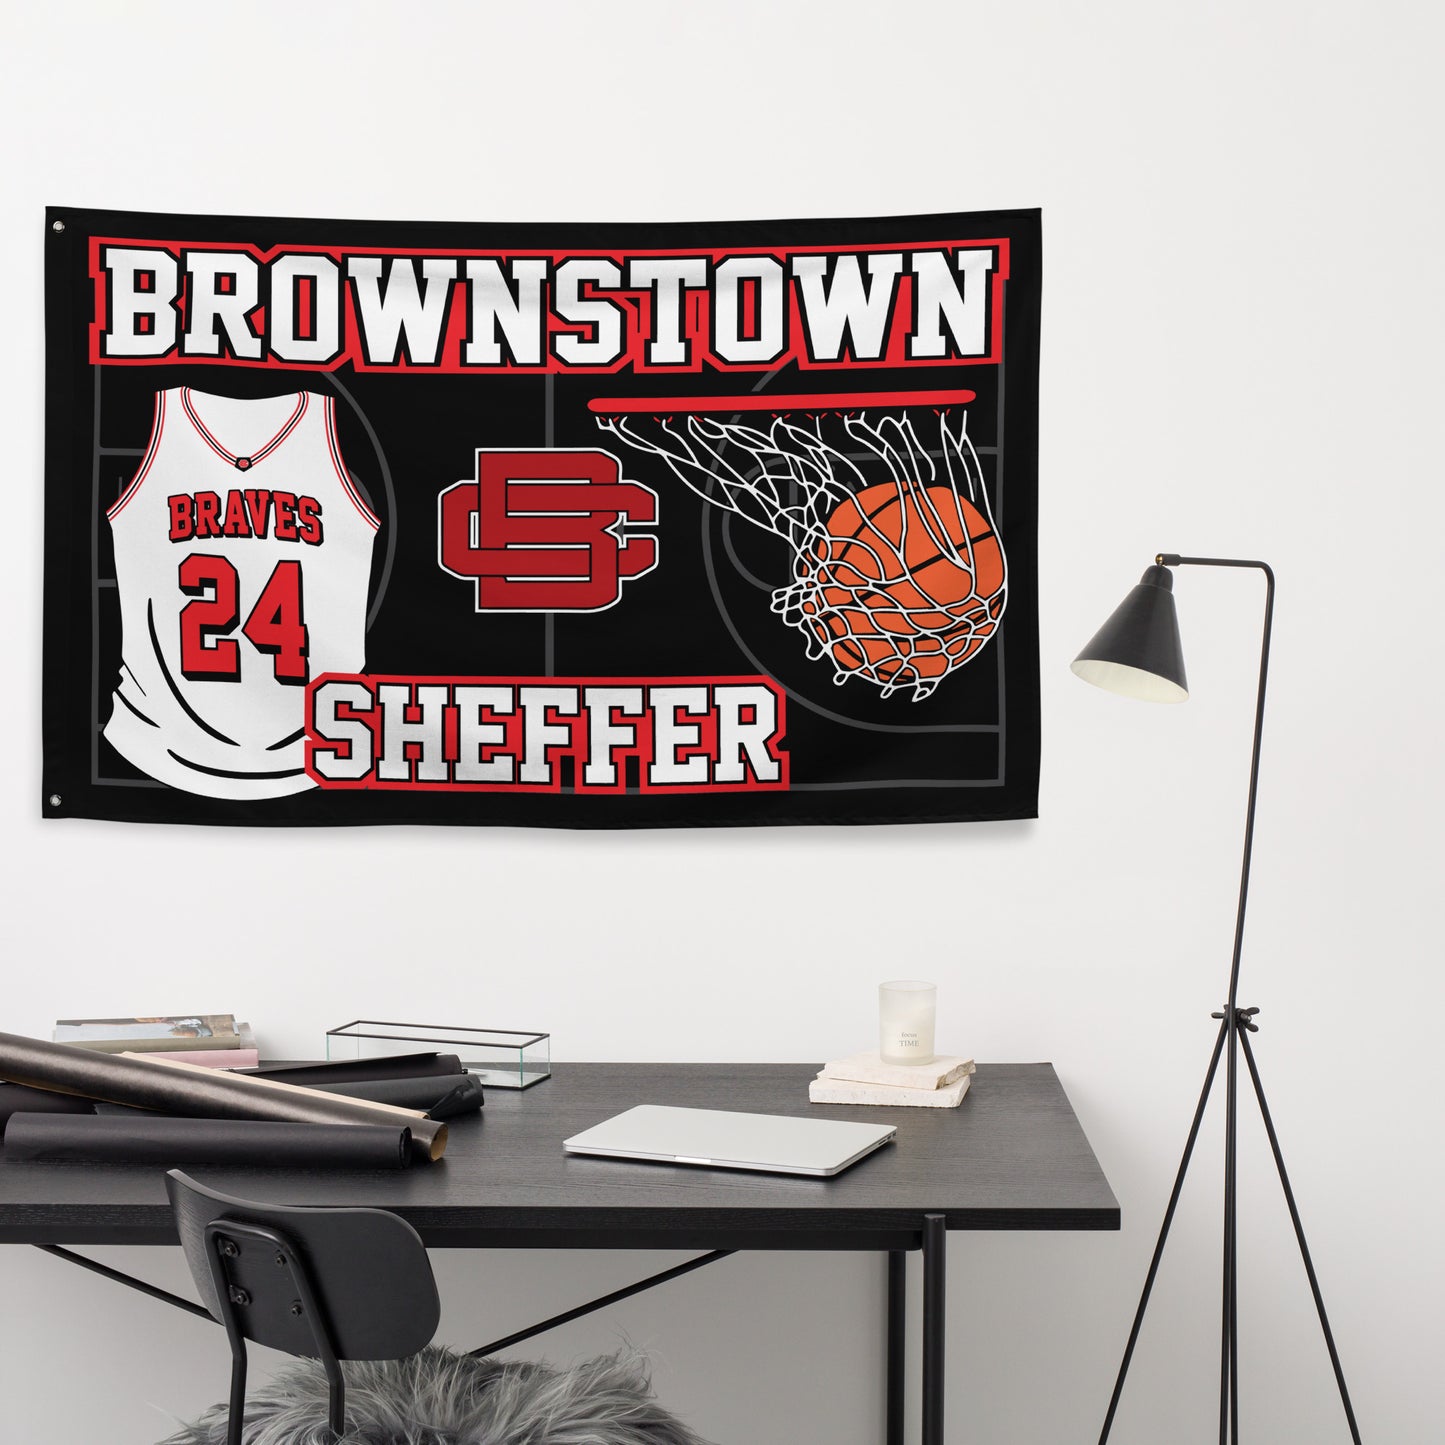 PERSONALIZED - Brownstown Braves Basketball 5' x 3' Wall Flag